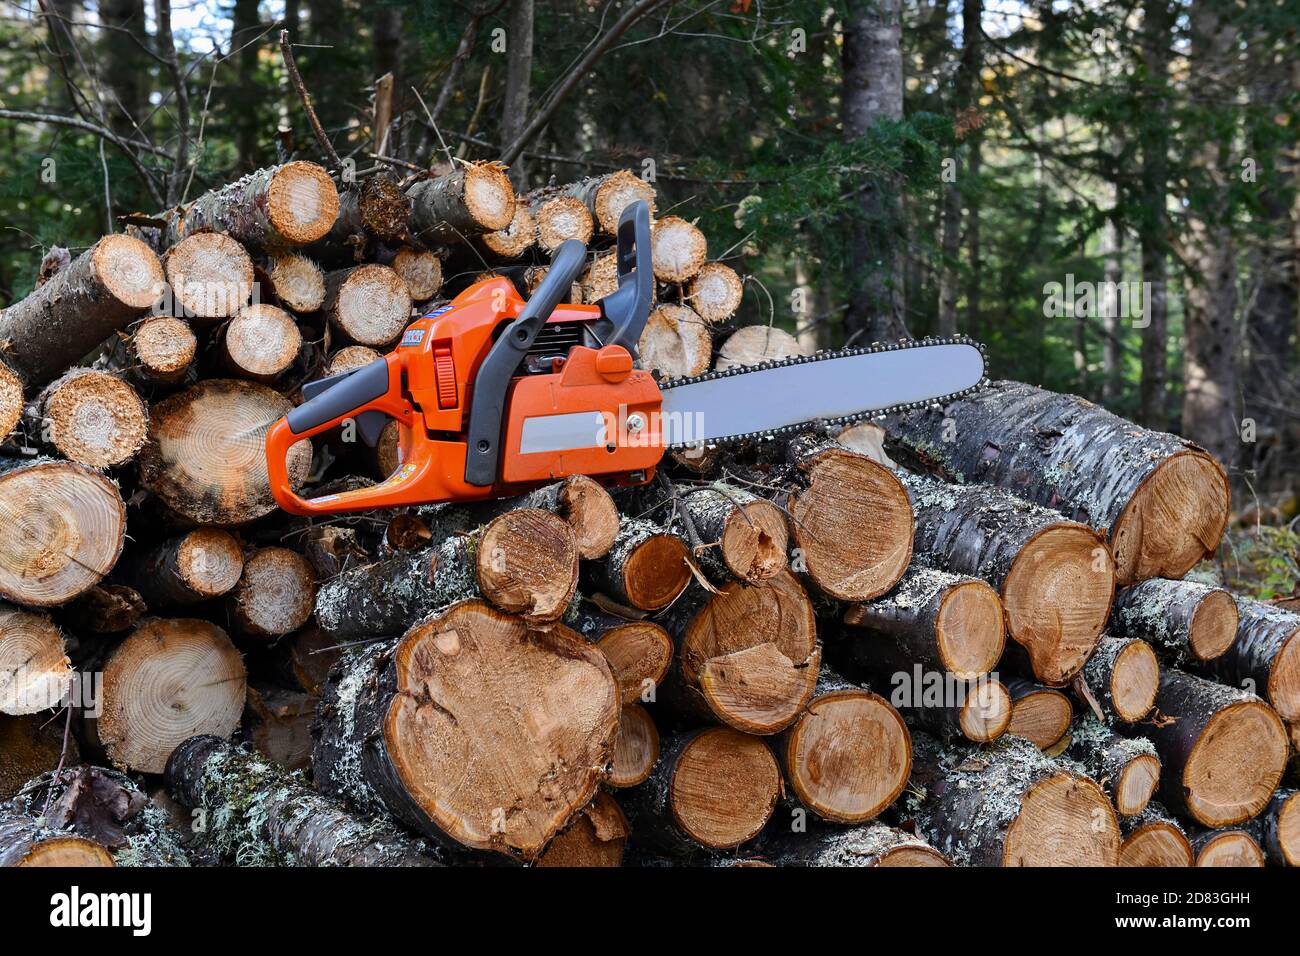 Chainsaw with woodpile of cut logs in background in forest, wood purposely blurred Stock Photo